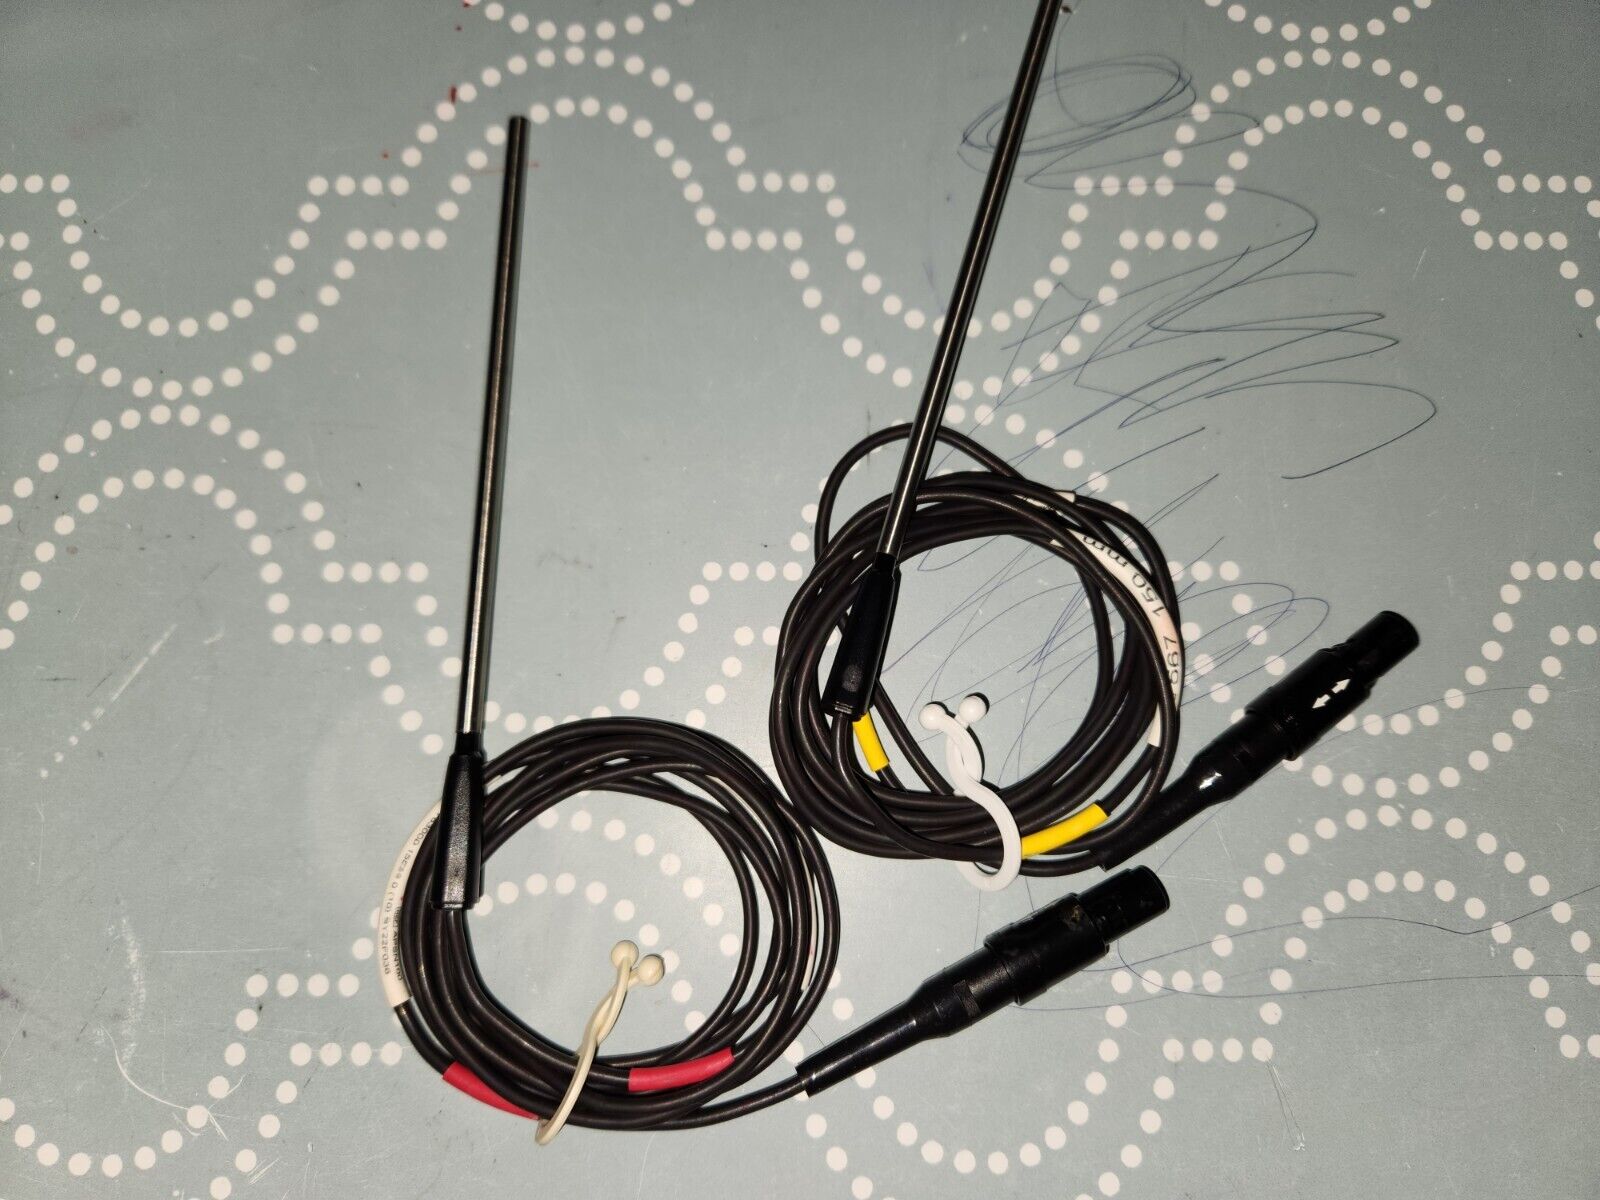 Medtronic Radiofrequency Probes